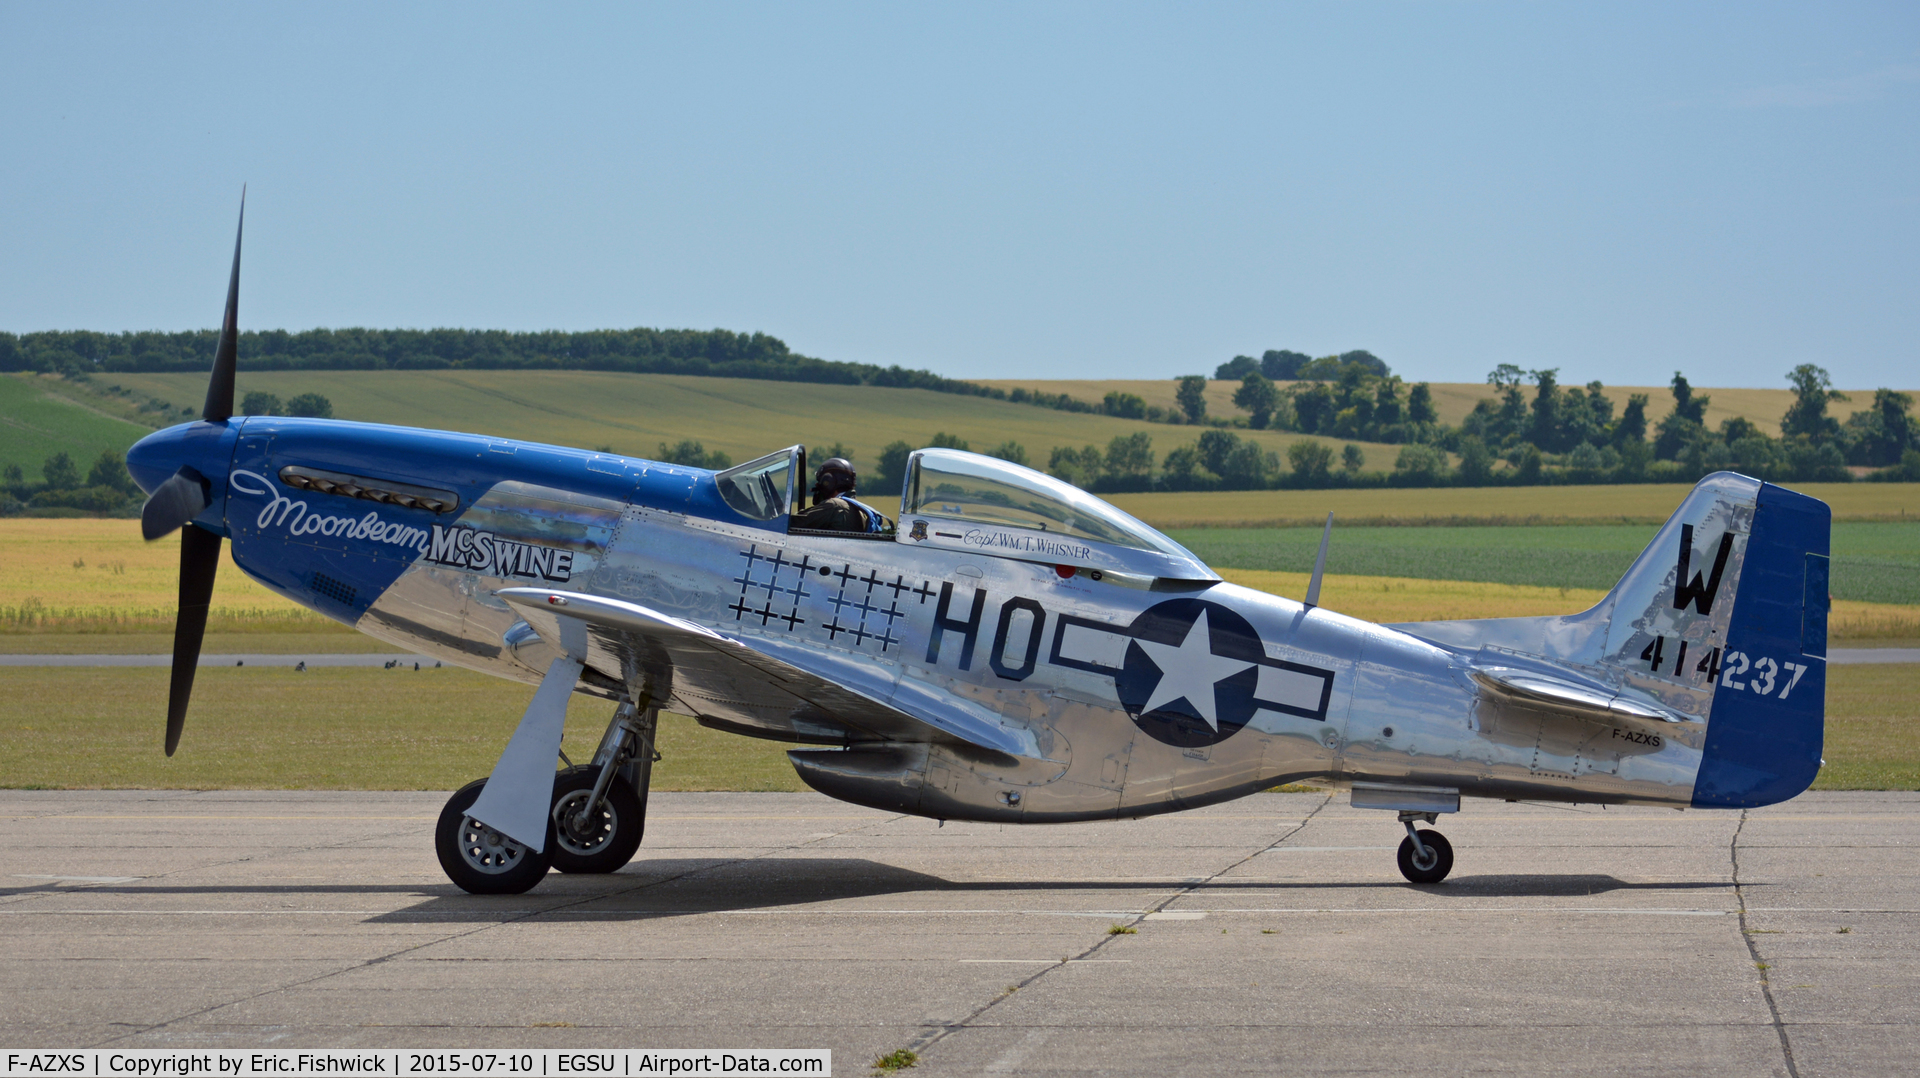 F-AZXS, 1944 North American F-51D Mustang C/N 122-40196, 1. 'Moonbeam McSwine' arriving for The Flying Legends Air Show, July 2015.